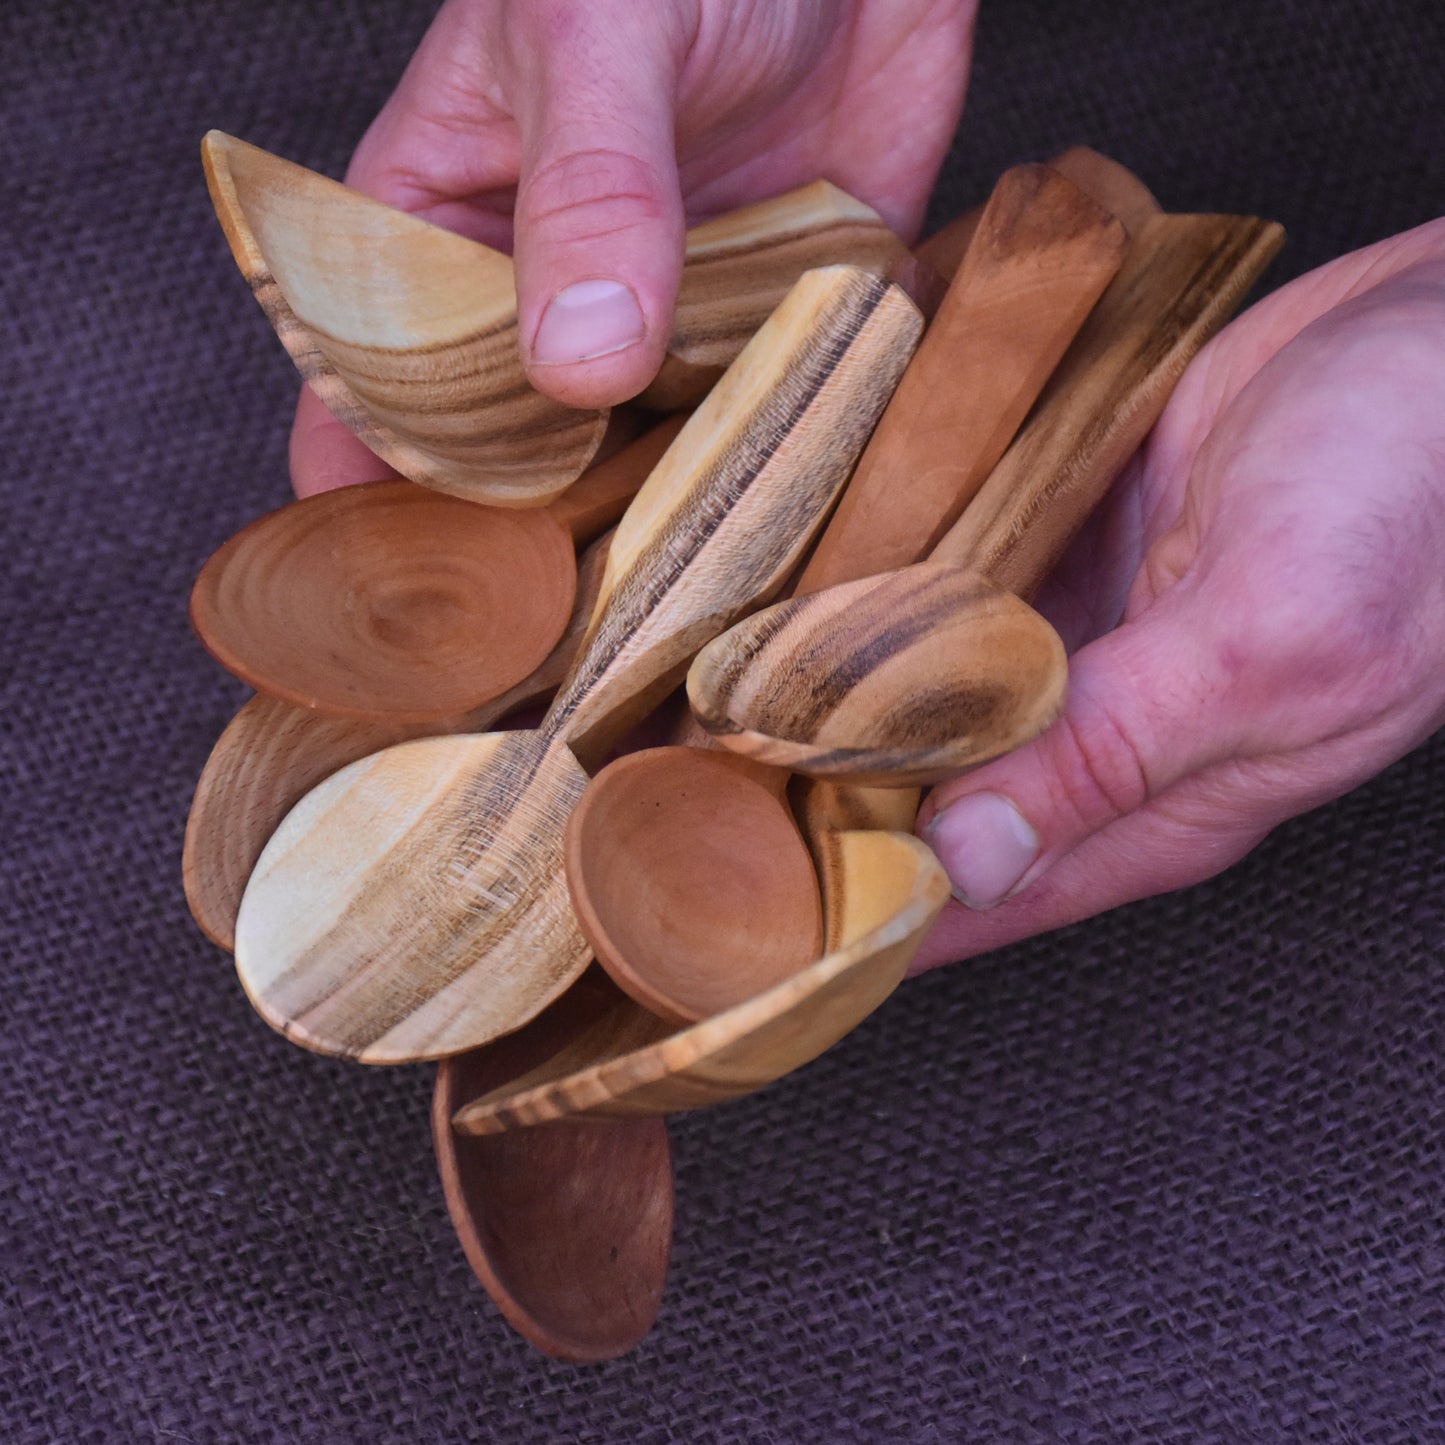 Woodcraft Session 4: Carve a Coffee Scoop @Southcombe Barn - 06.07.23